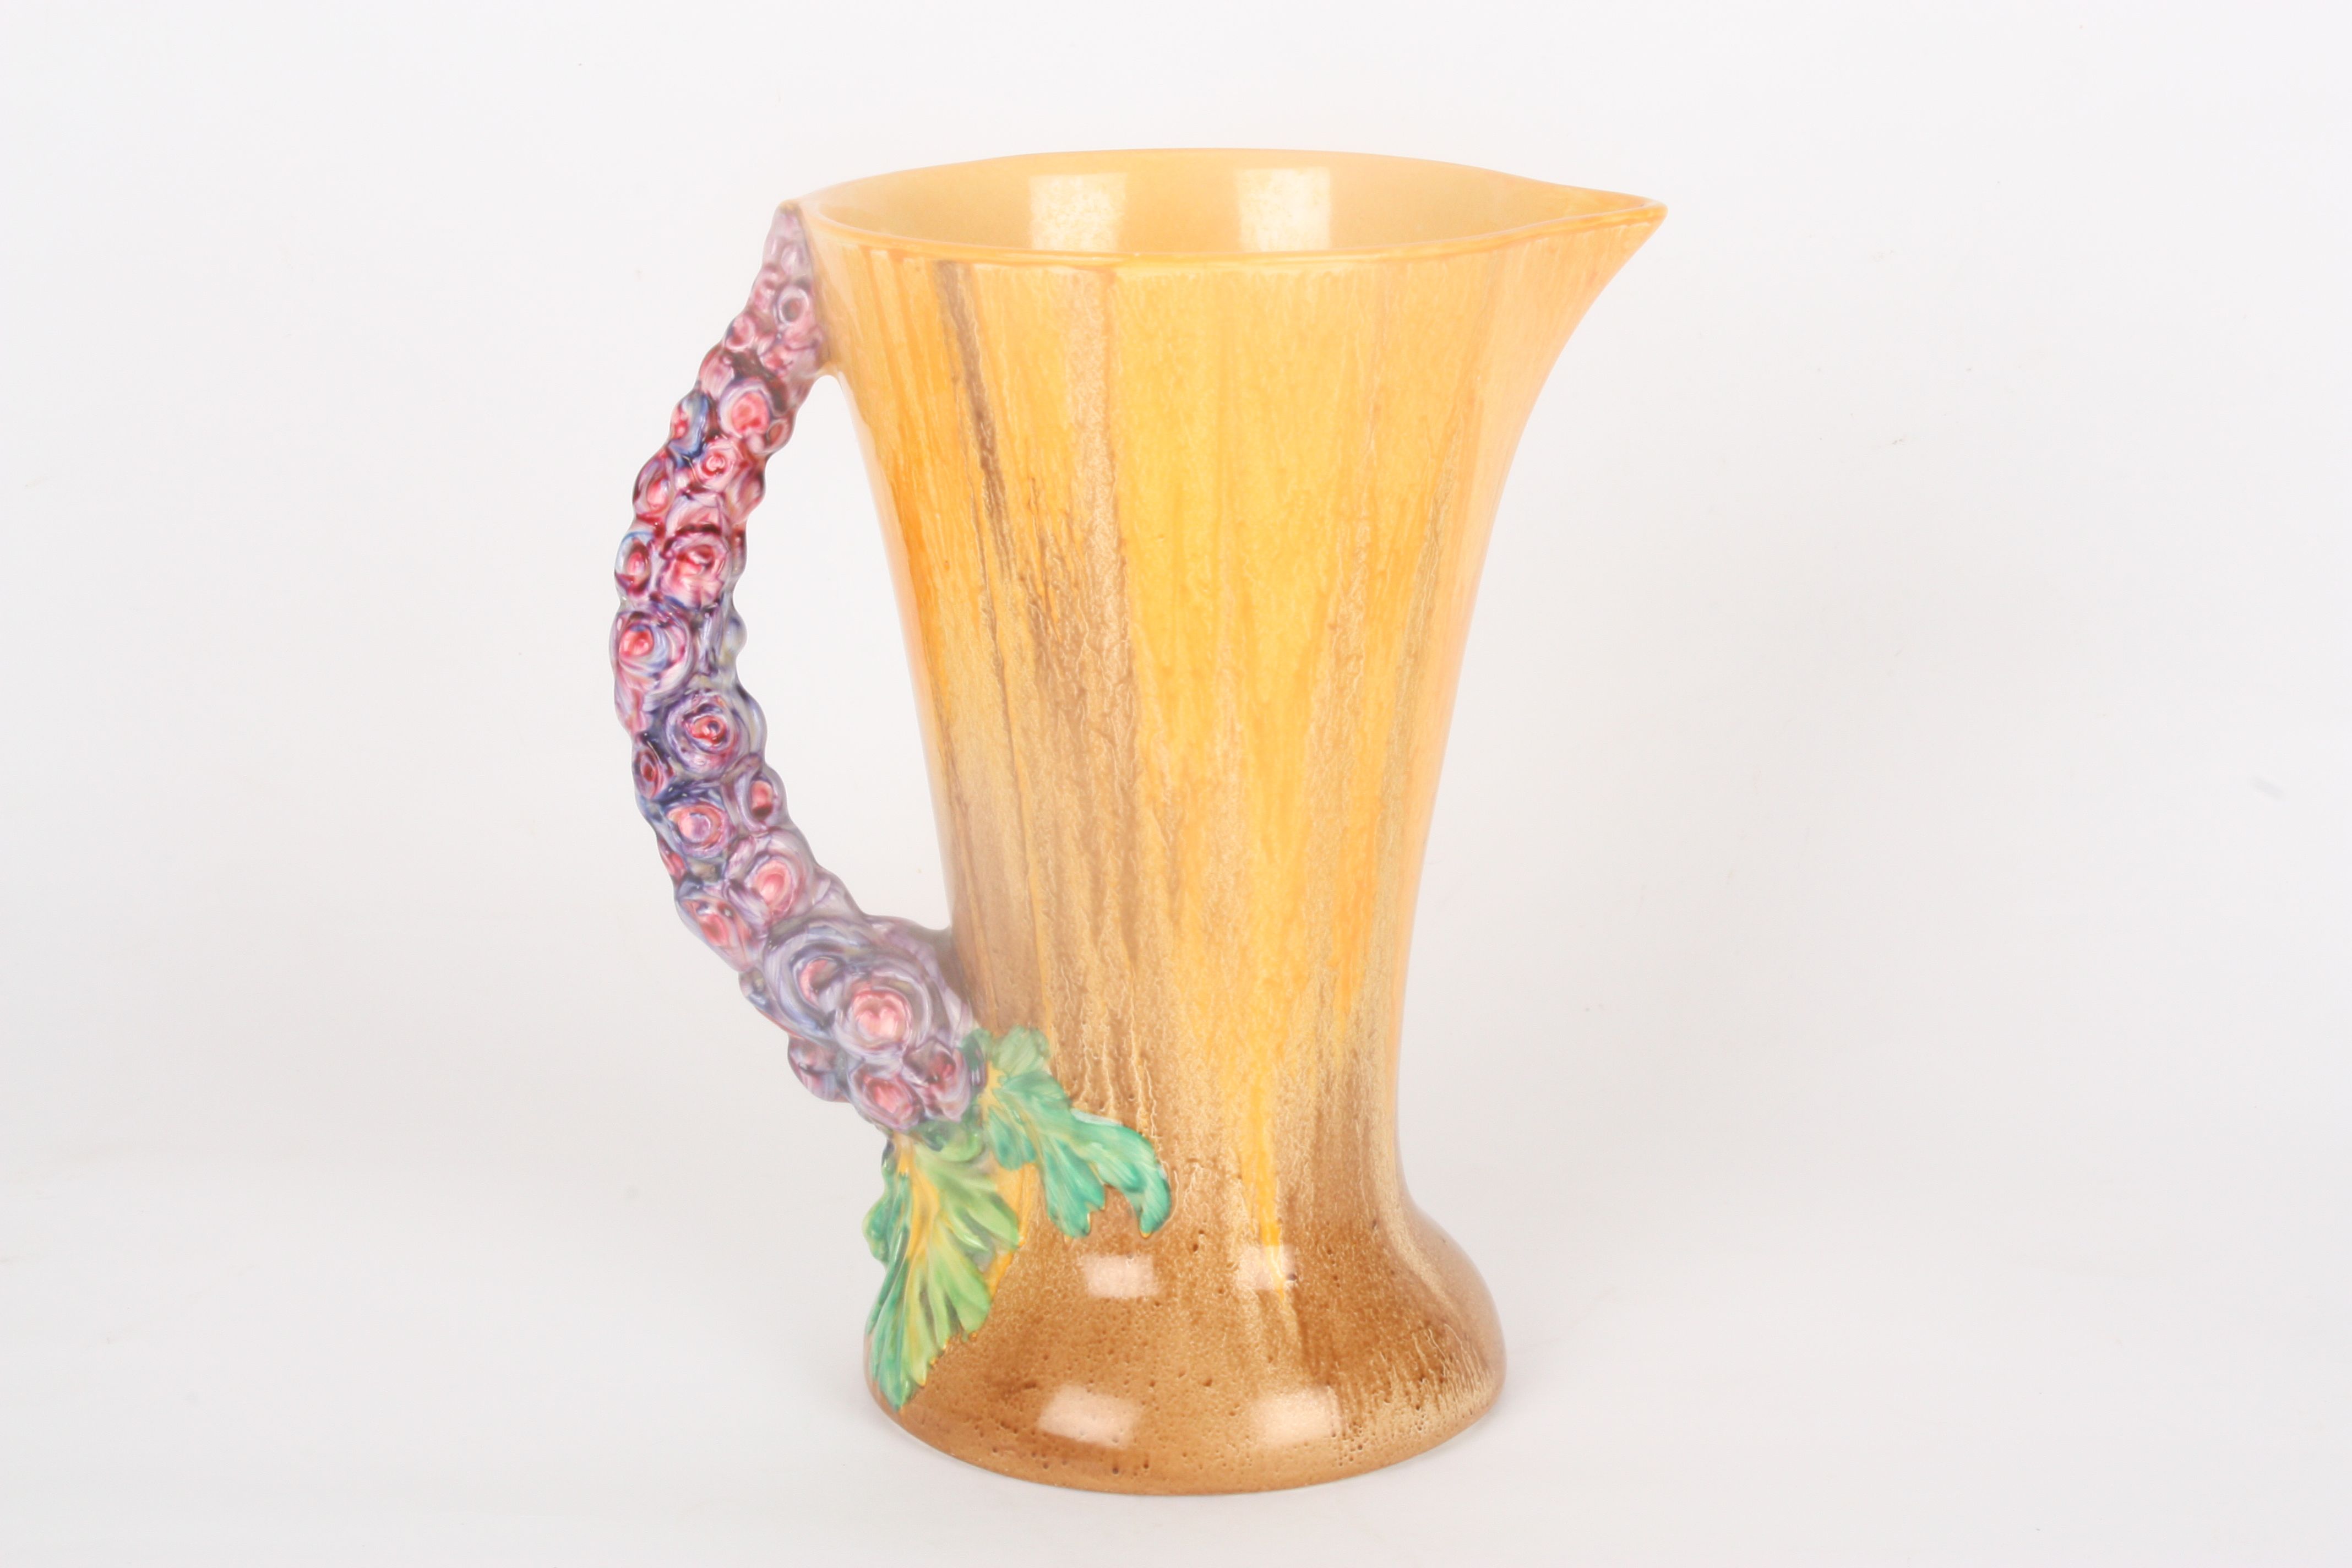 A Clarice Cliff My Garden jug
the orange and brown slip glazed body with moulded floral handle. - Image 2 of 4